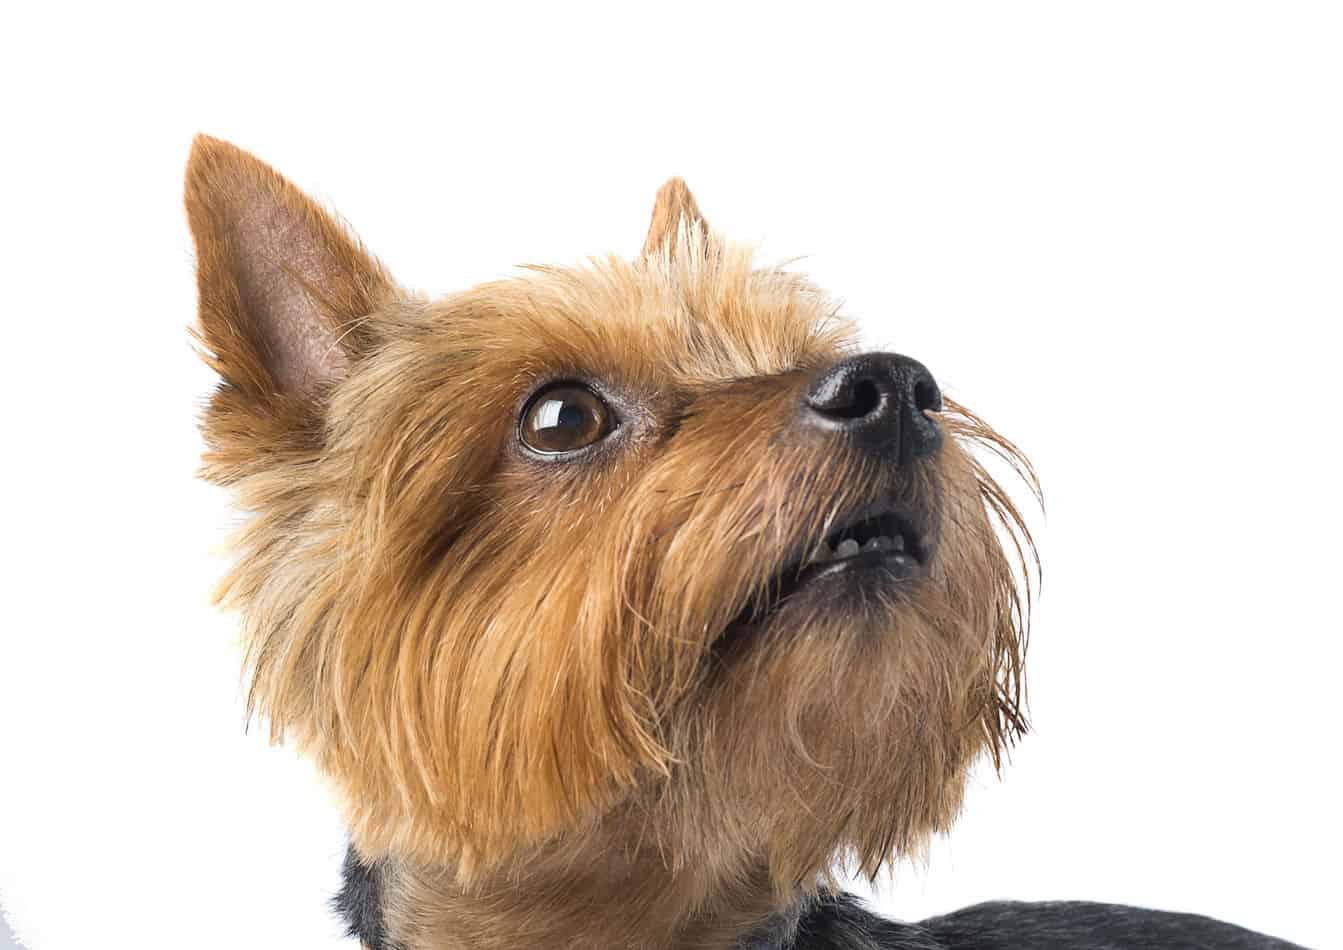 owning a yorkshire terrier